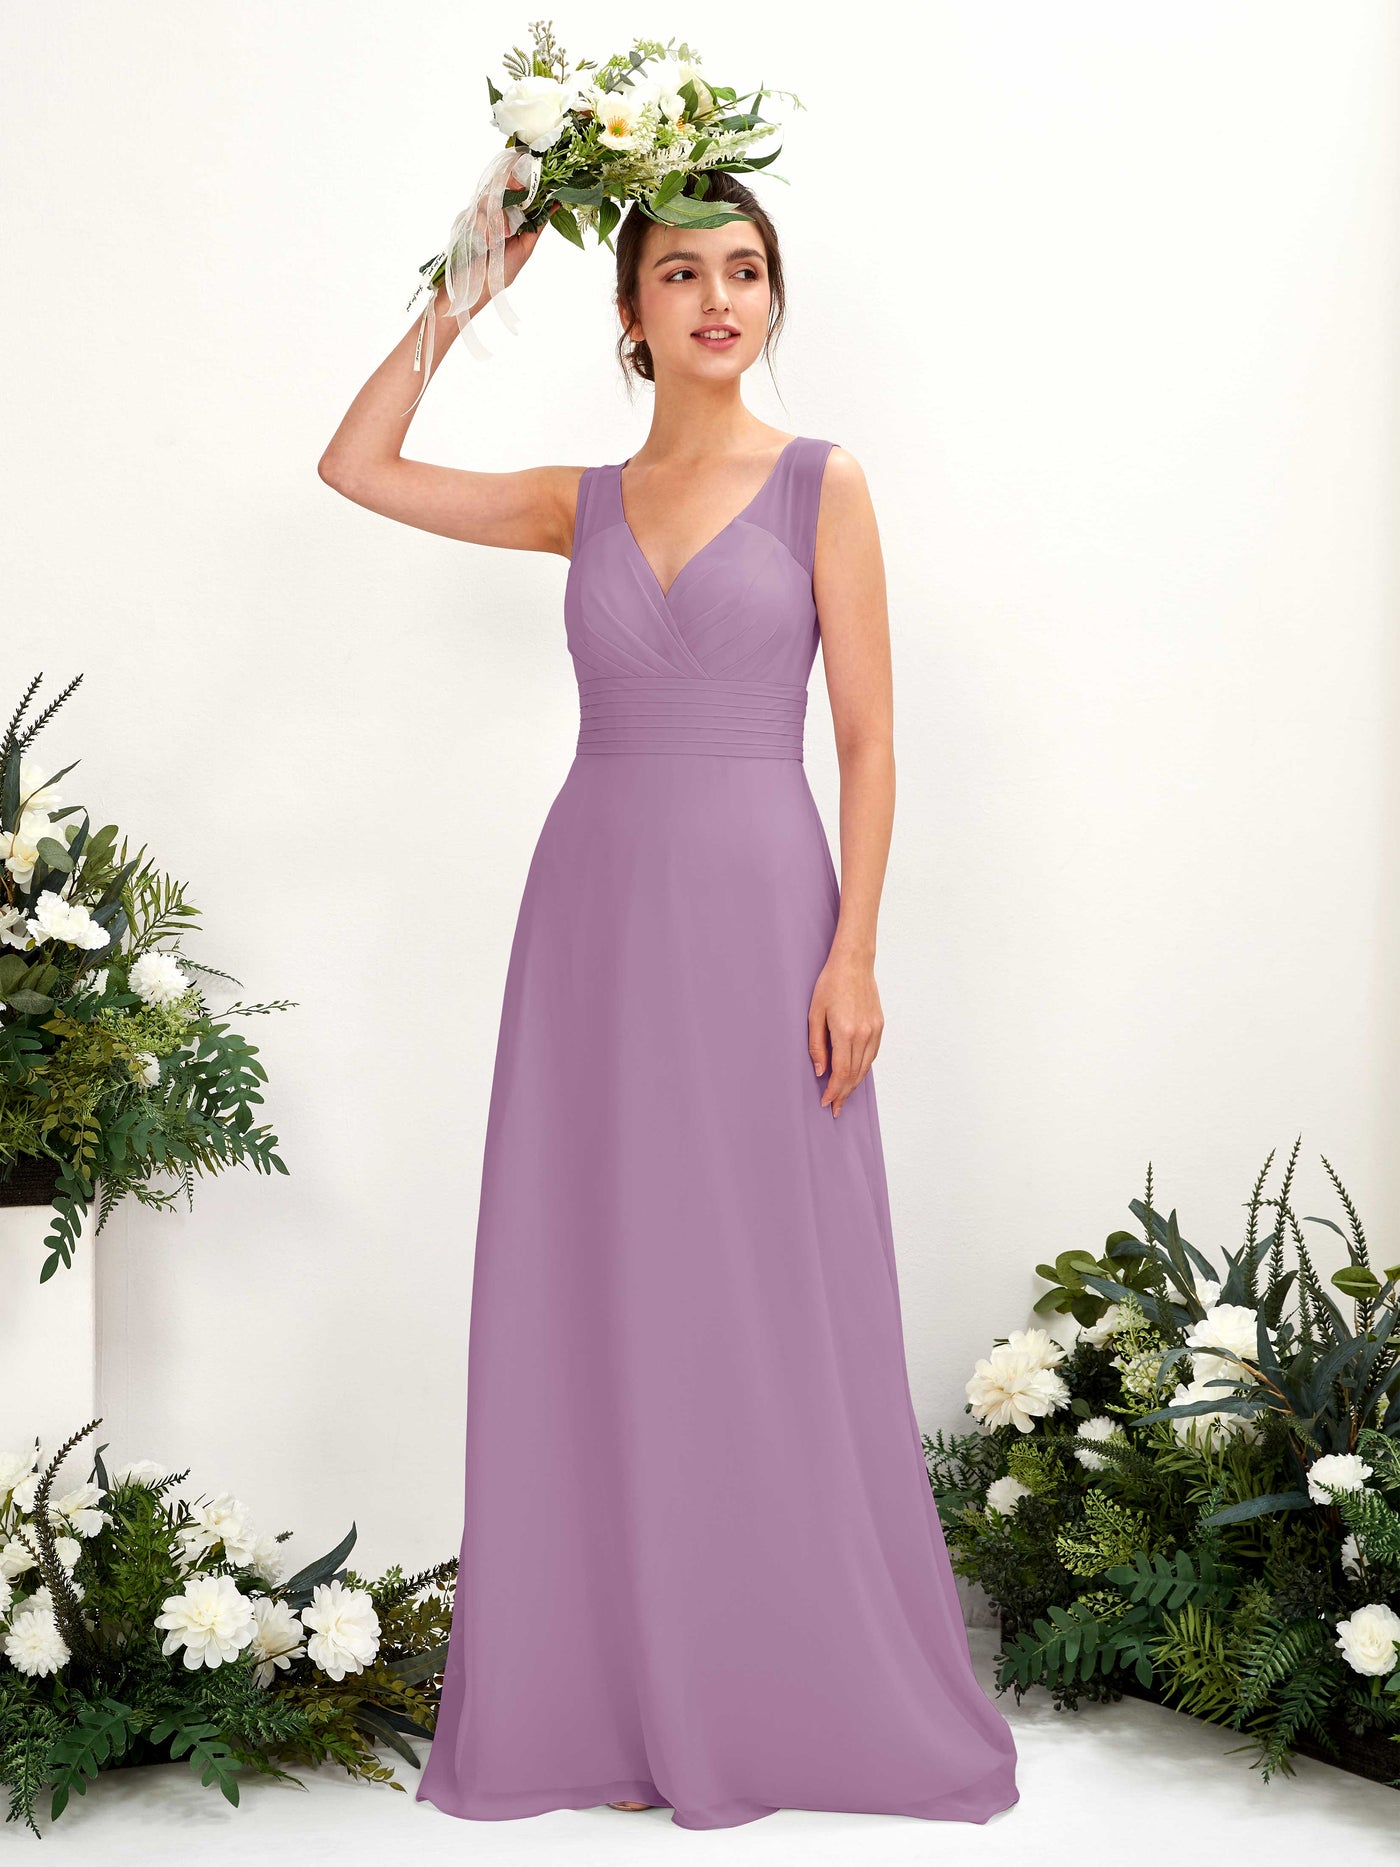 Orchid Mist Bridesmaid Dresses Bridesmaid Dress A-line Chiffon Straps Full Length Sleeveless Wedding Party Dress (81220921)#color_orchid-mist